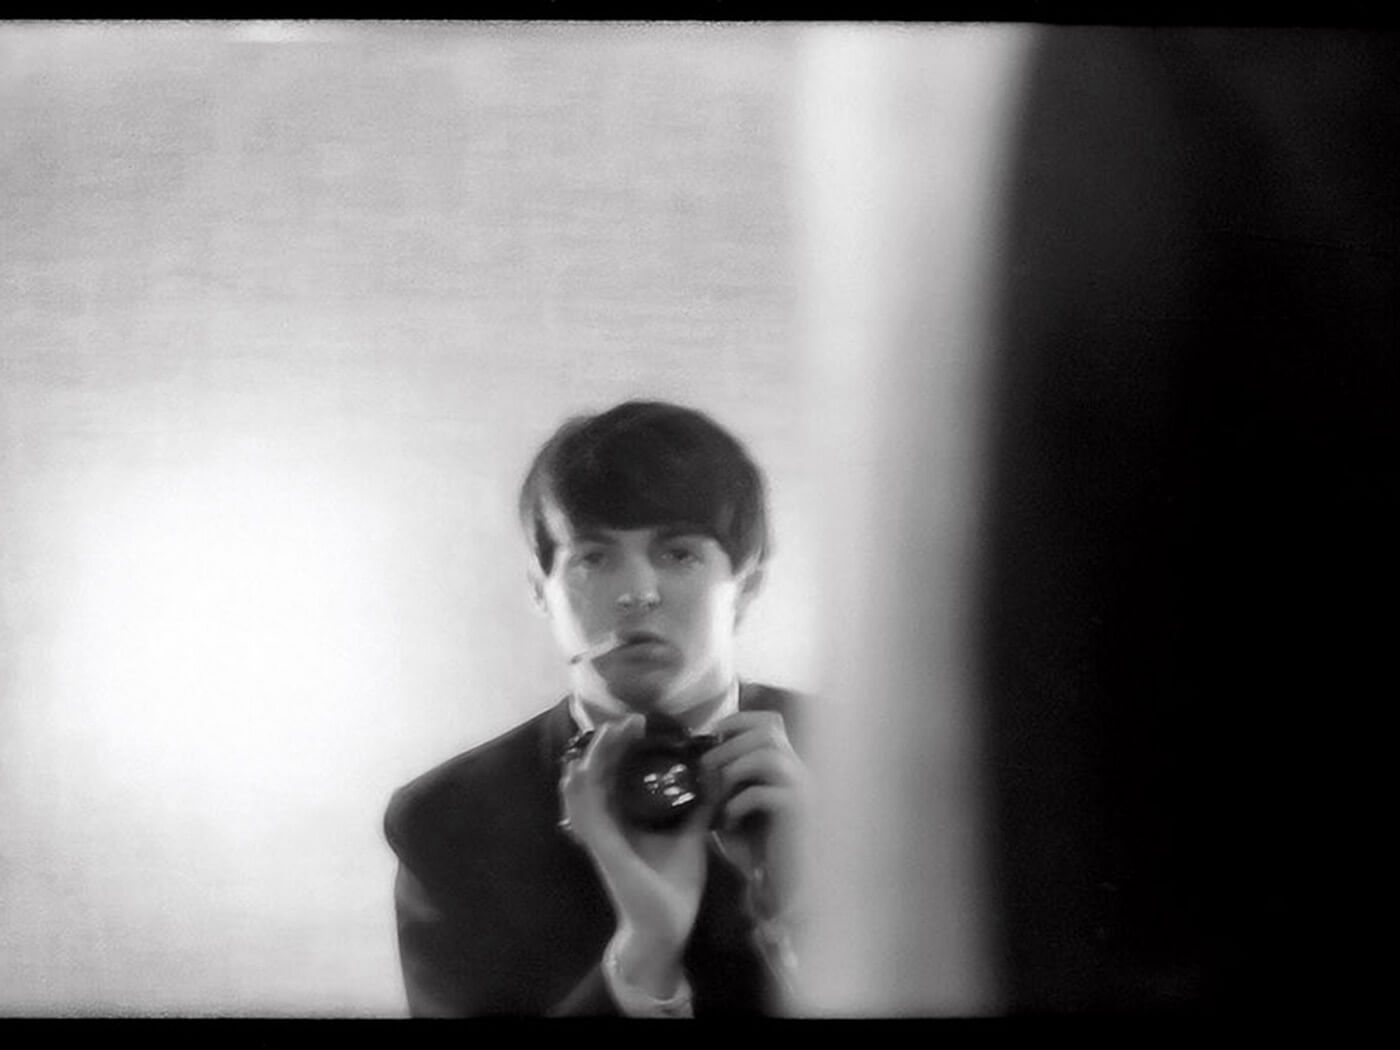 Paul McCartney announces new photography book, 1964: Eyes Of The Storm